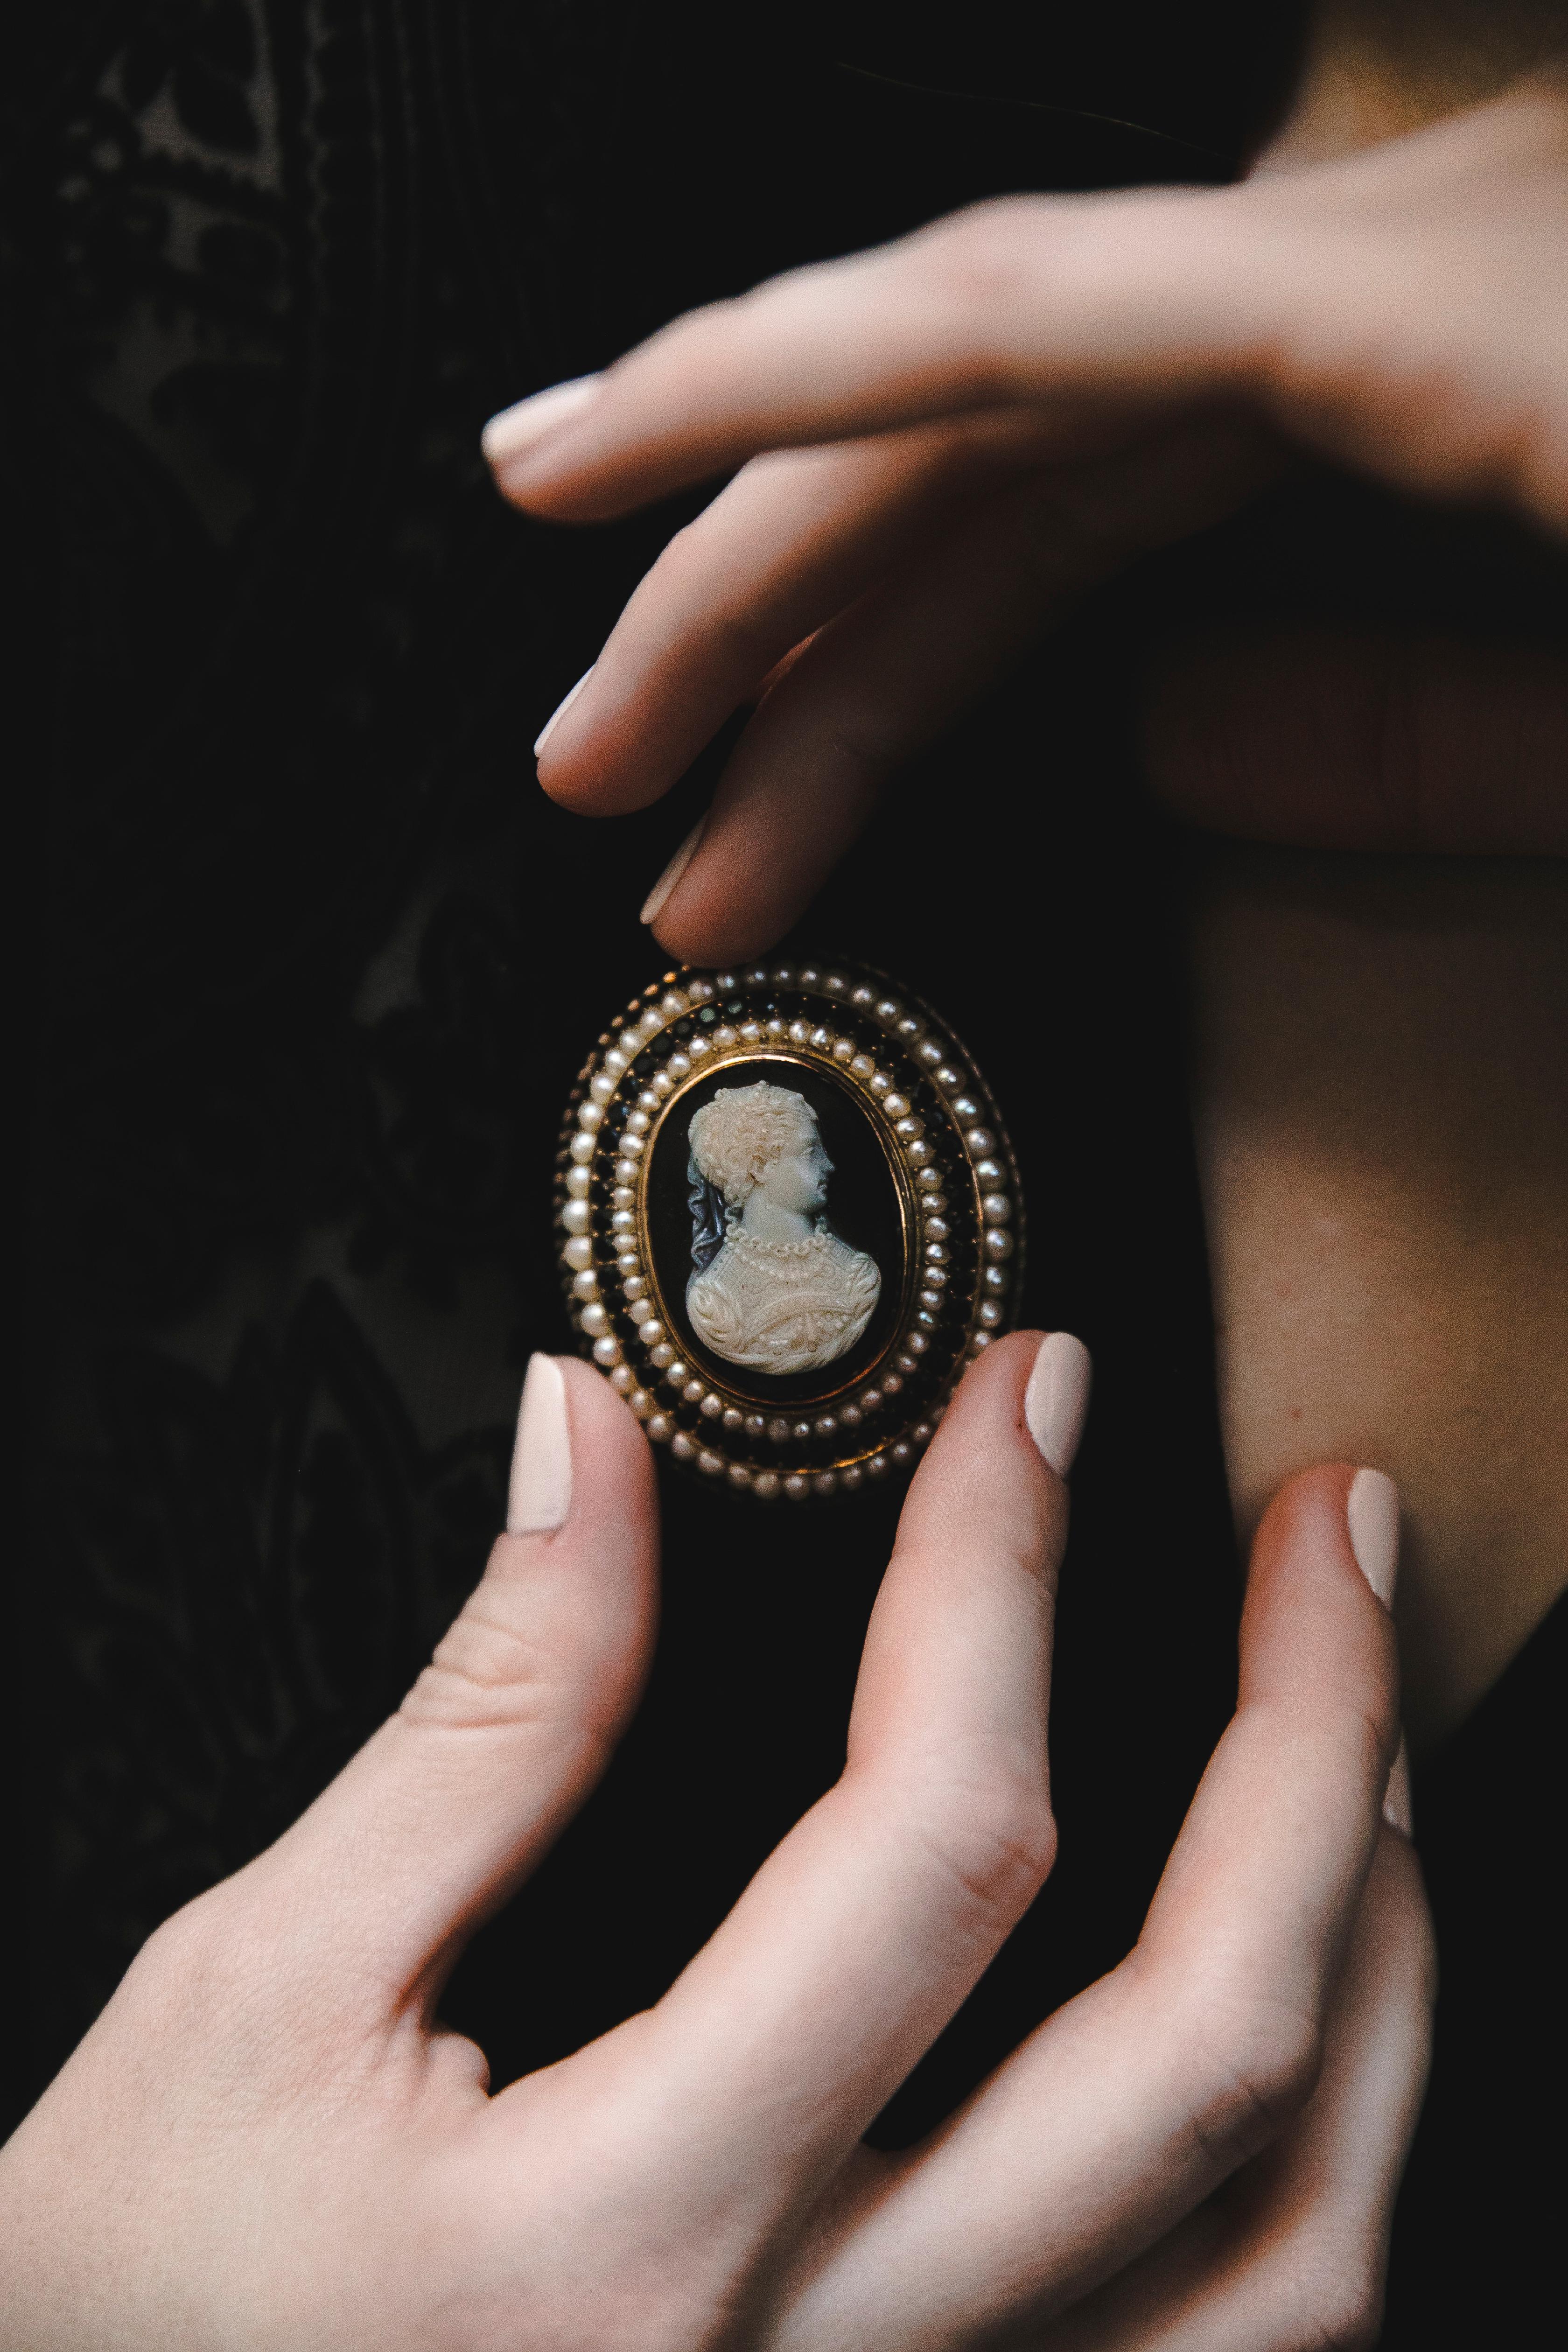 Antique Victorian Agate and Pearl Seeds, Garnet Yellow Gold Cameo Brooch 1860
Extremely delicate and fine work depicting a high society lady, with pearls and silk dress. 
The brooch is arranged as levels building up, creating oval lines of Pearl